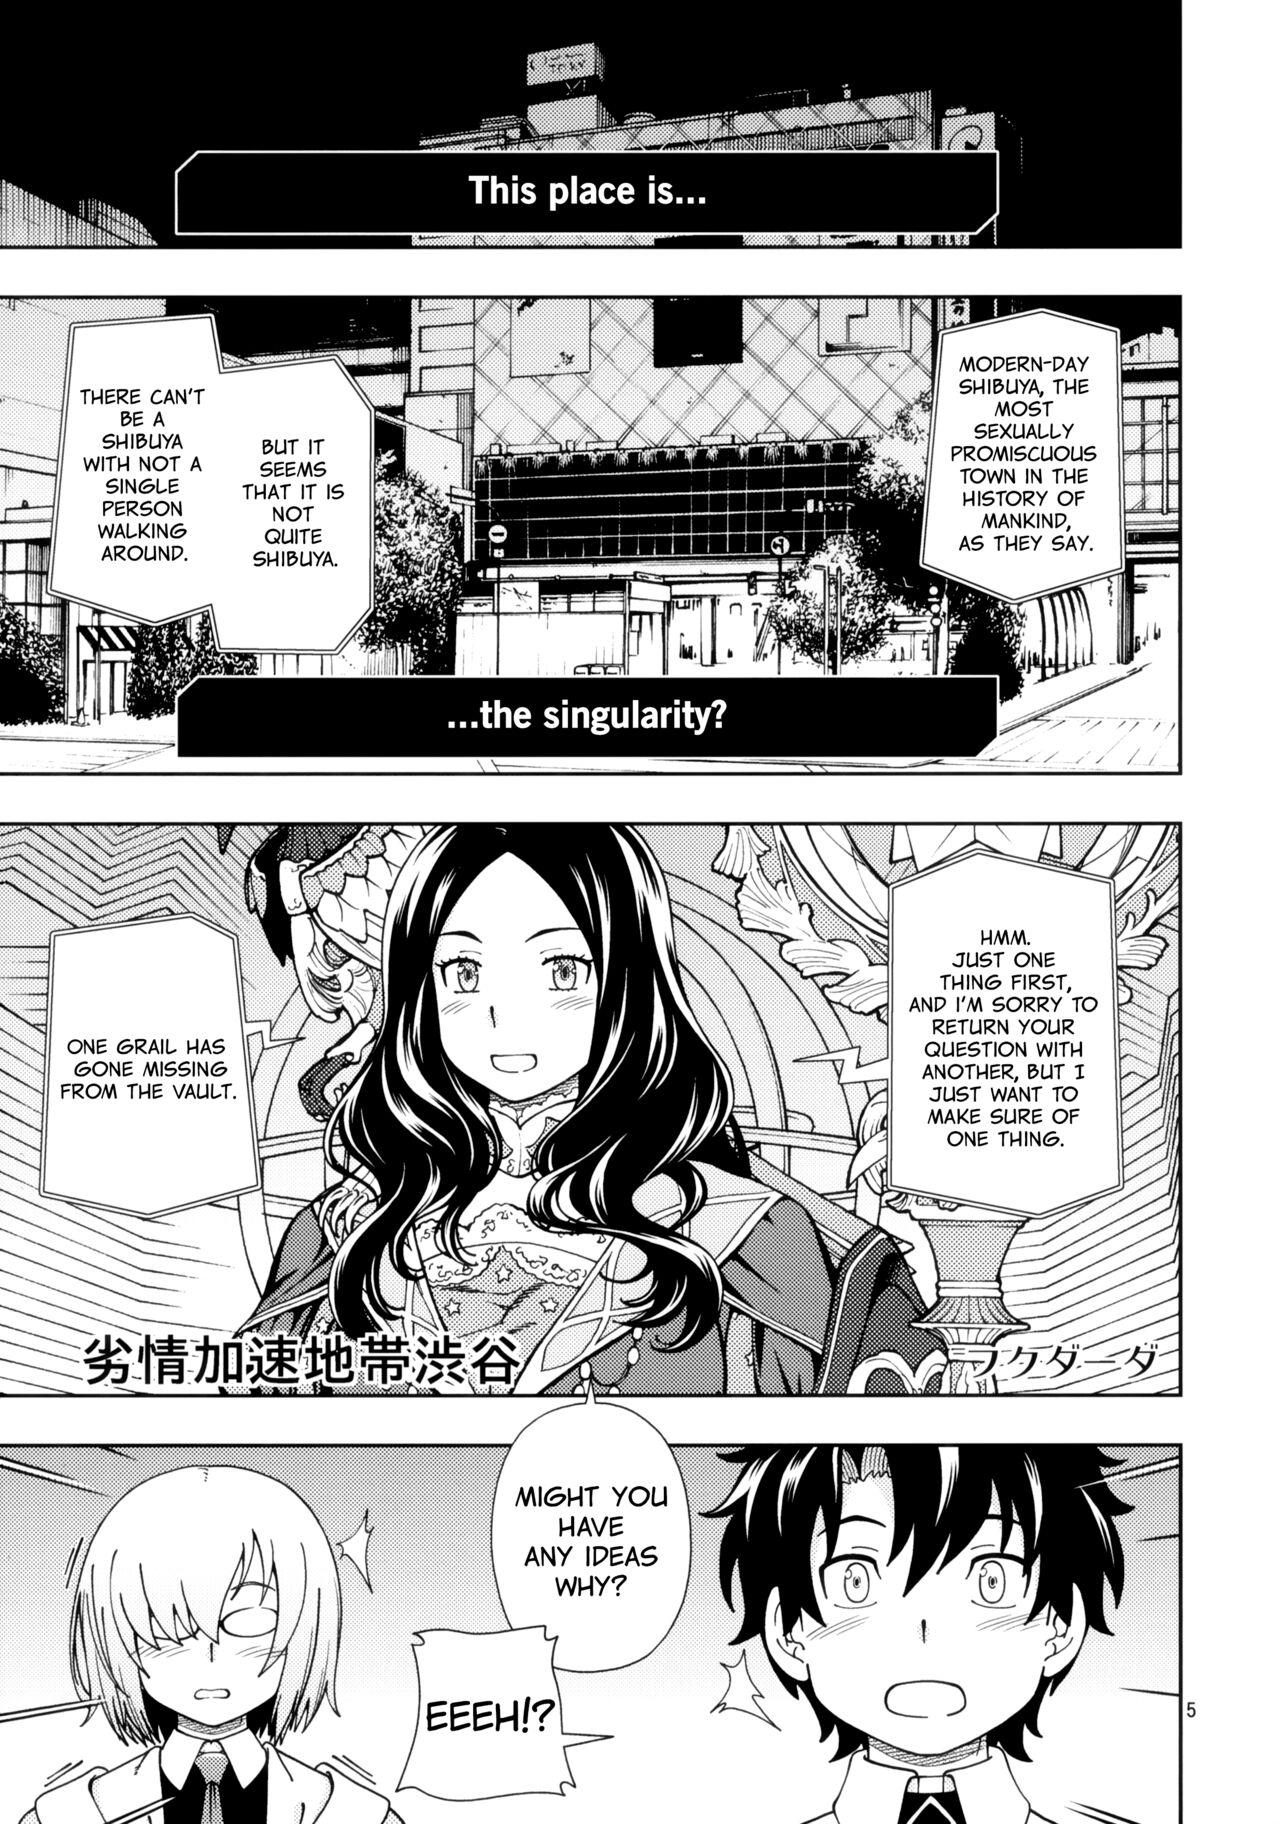 Missionary Shoujo Tokuiten | A Girl's Singularity - Fate grand order Kink - Page 4